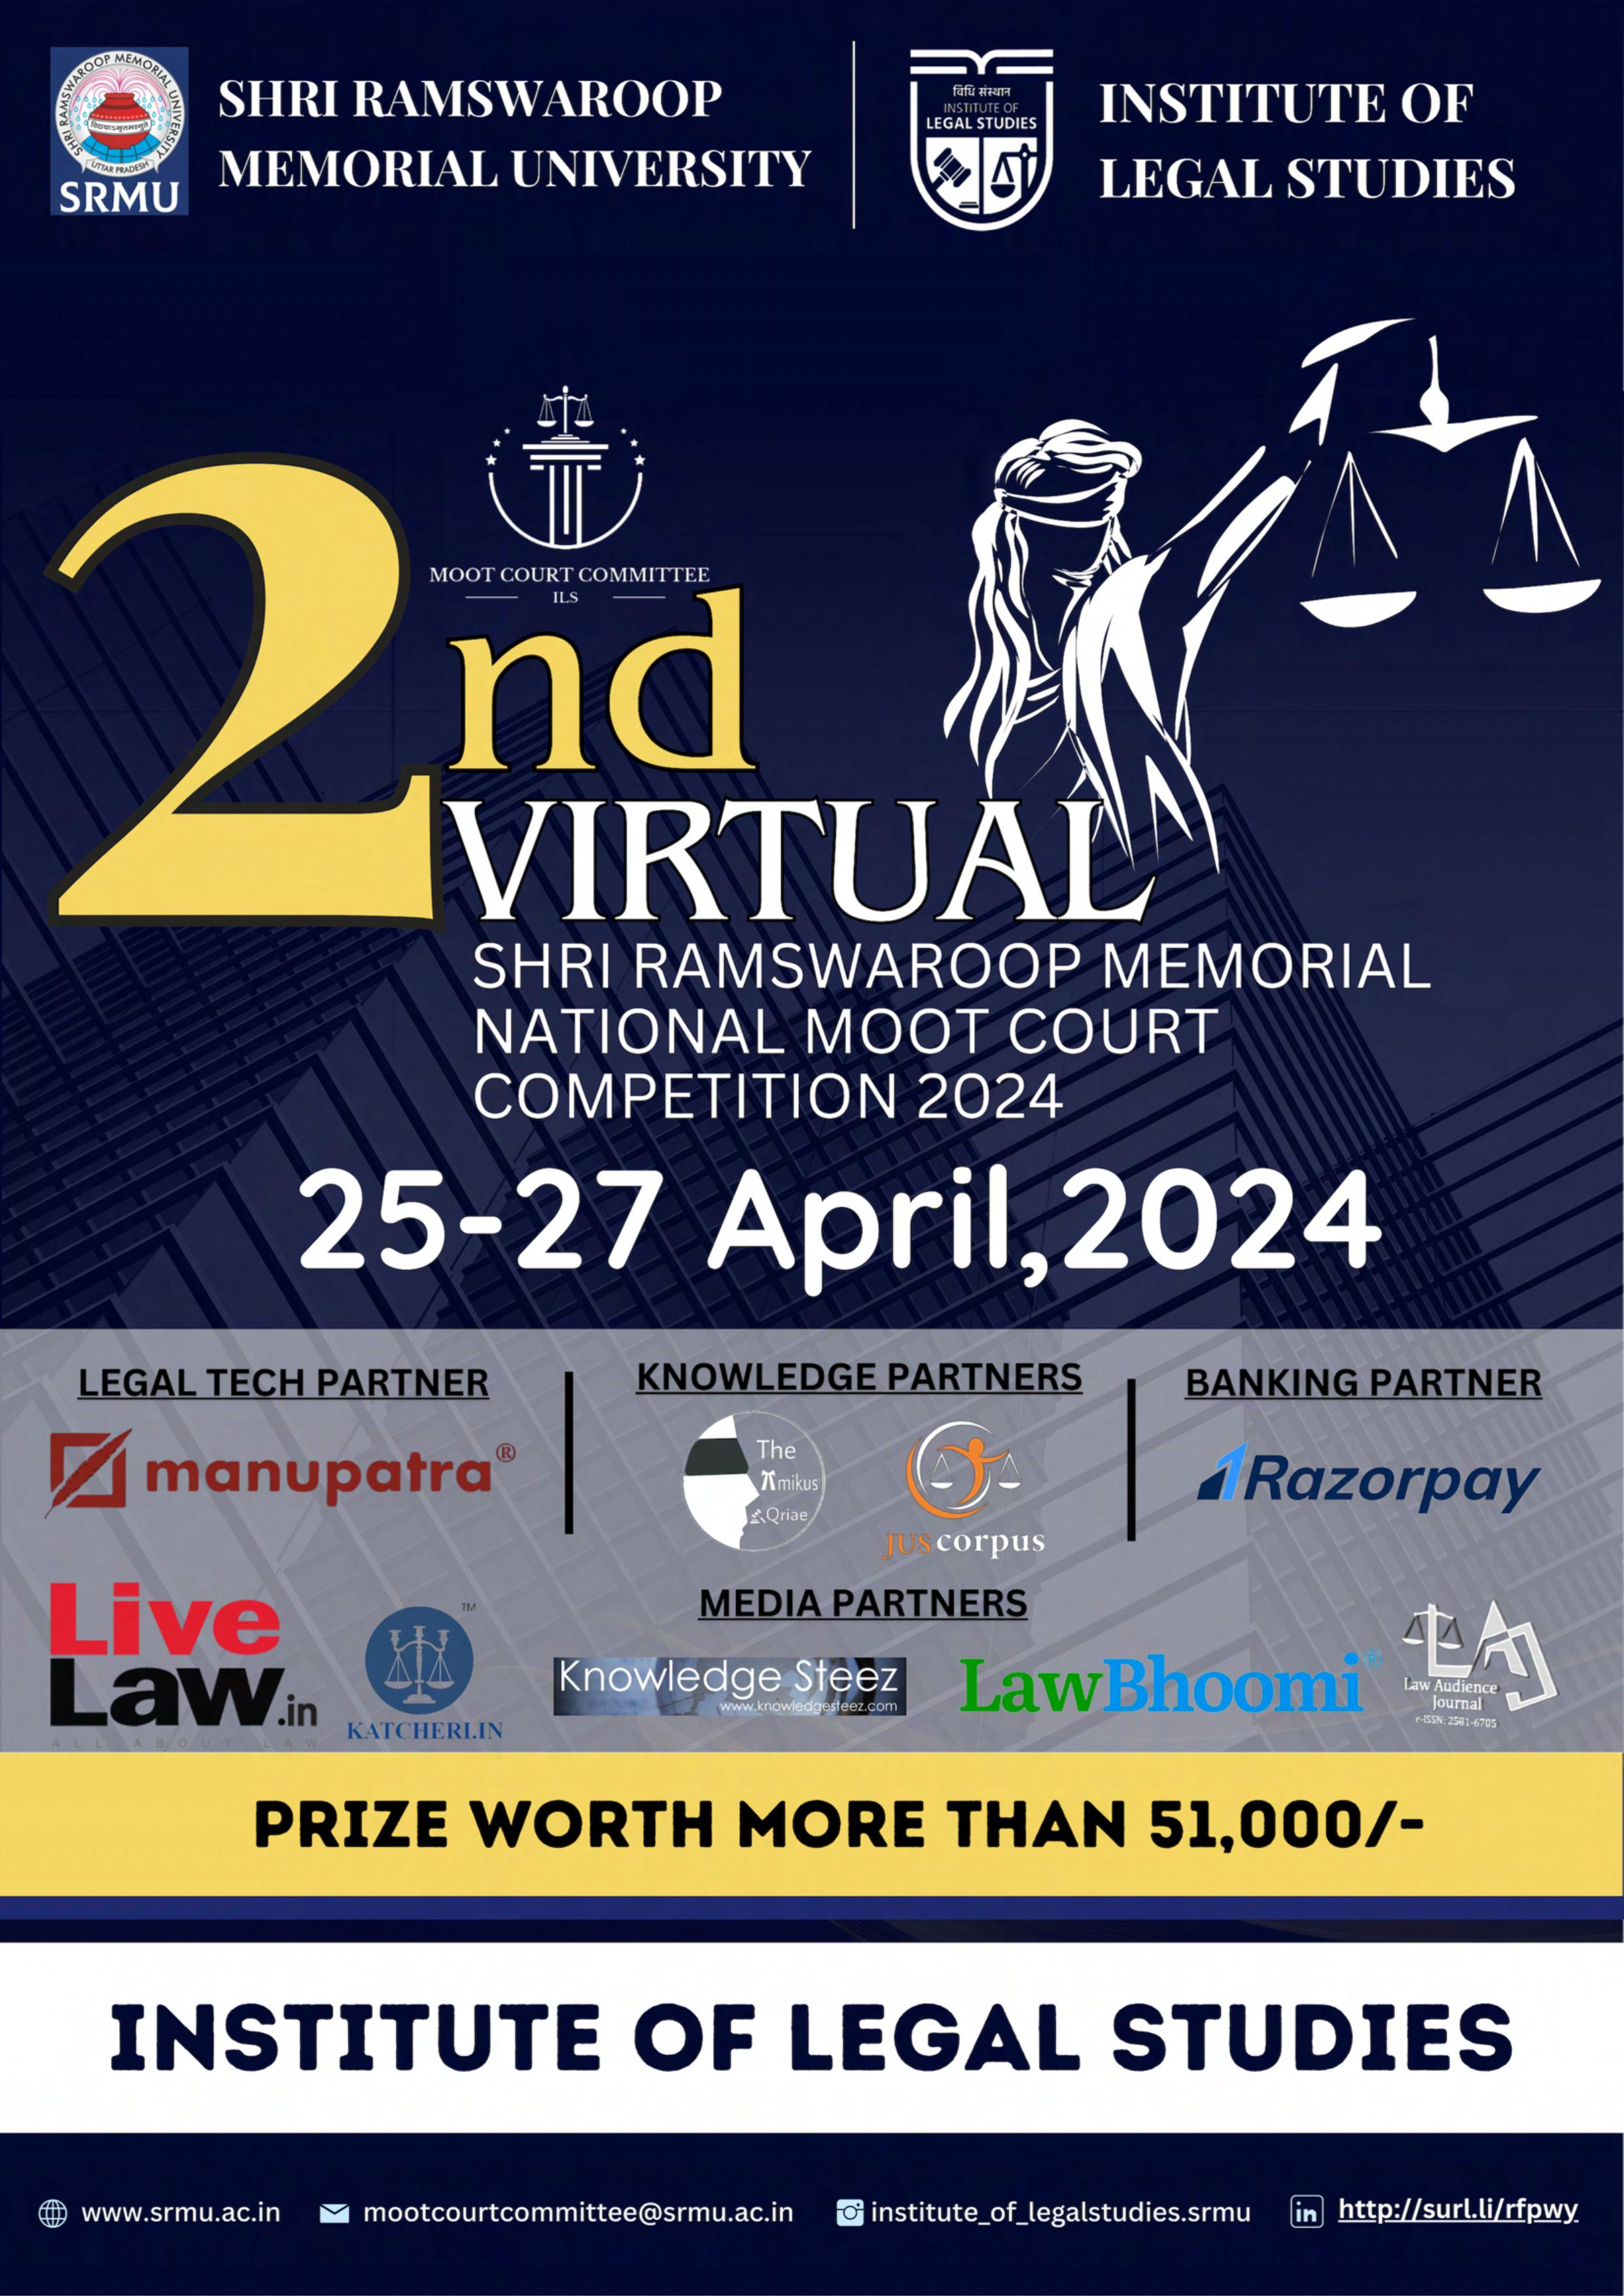 2nd Virtual Shri Ramswaroop Memorial National Moot Court Competition, 2024